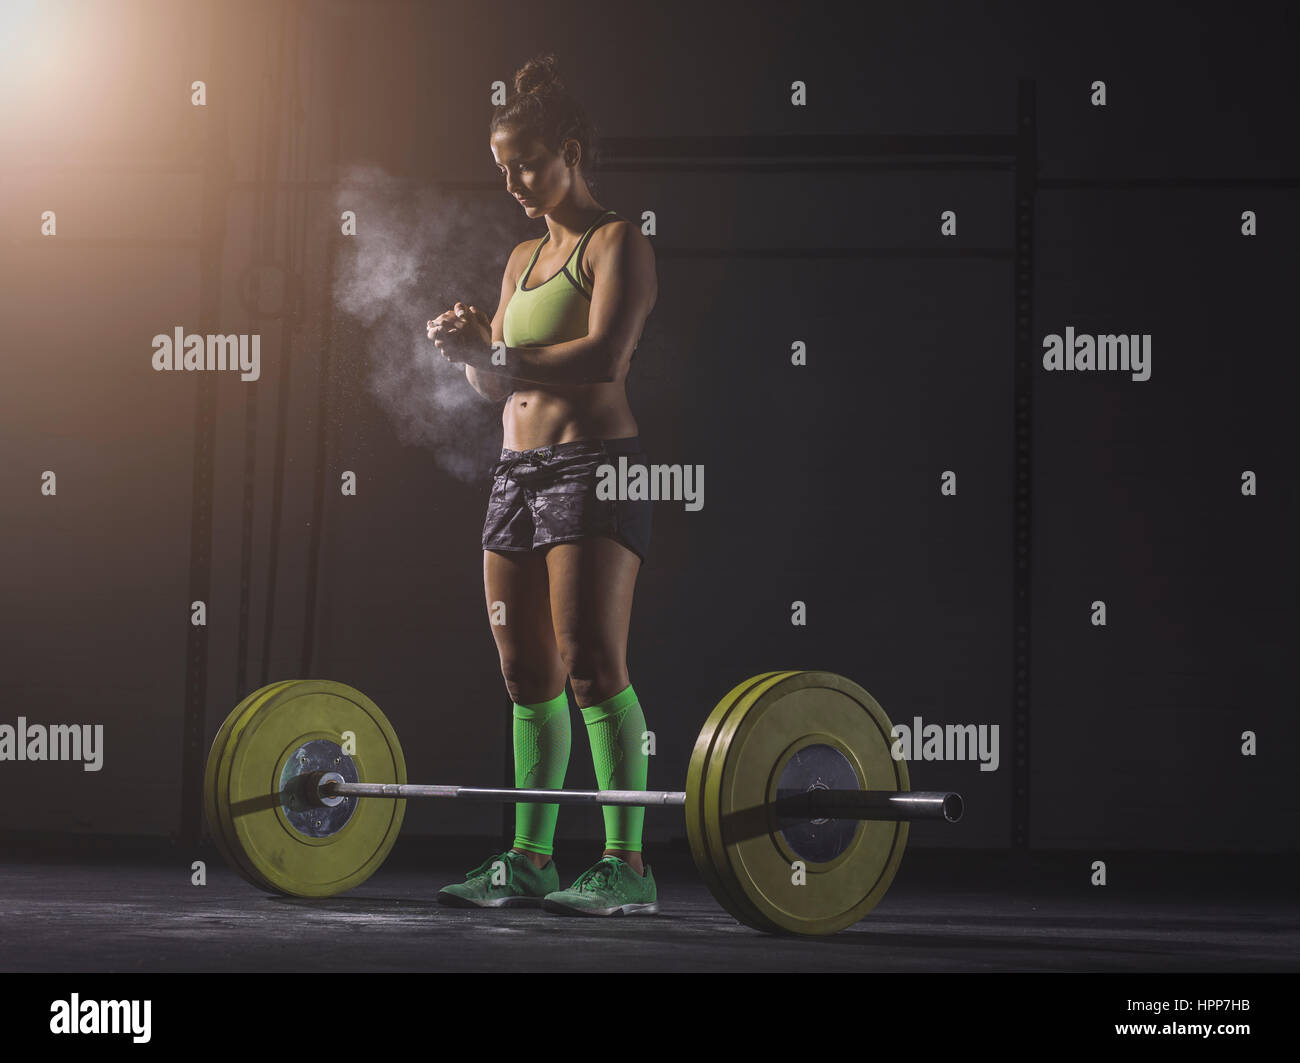 Young woman preparing to lift barbell Stock Photo